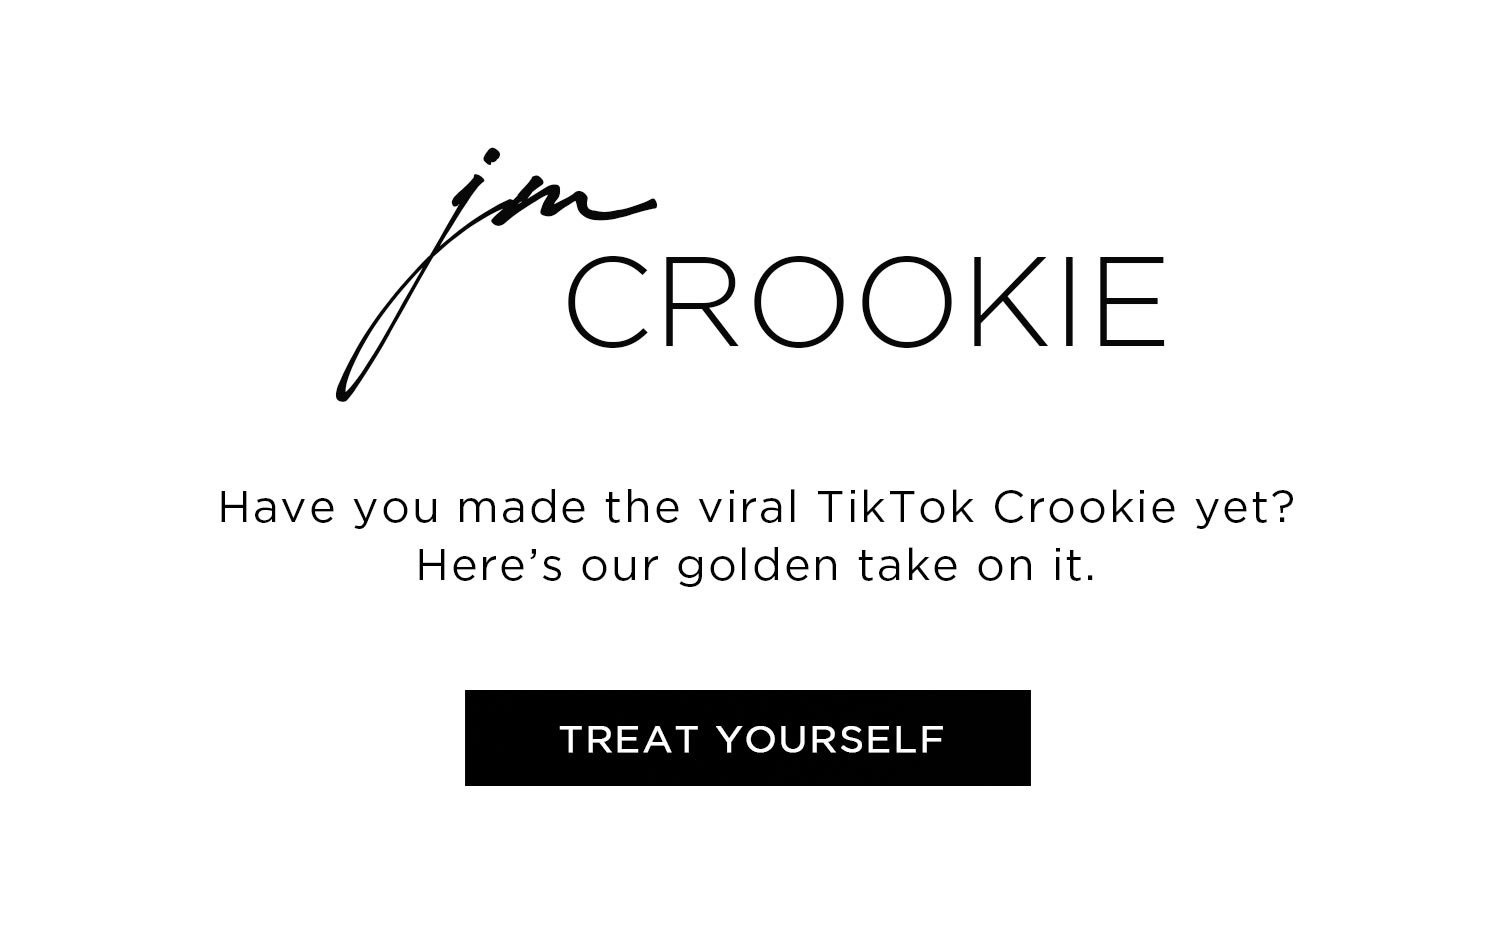 Jm Crookie | Have you made the viral Tiktok Crookie yet? | Treat yourself